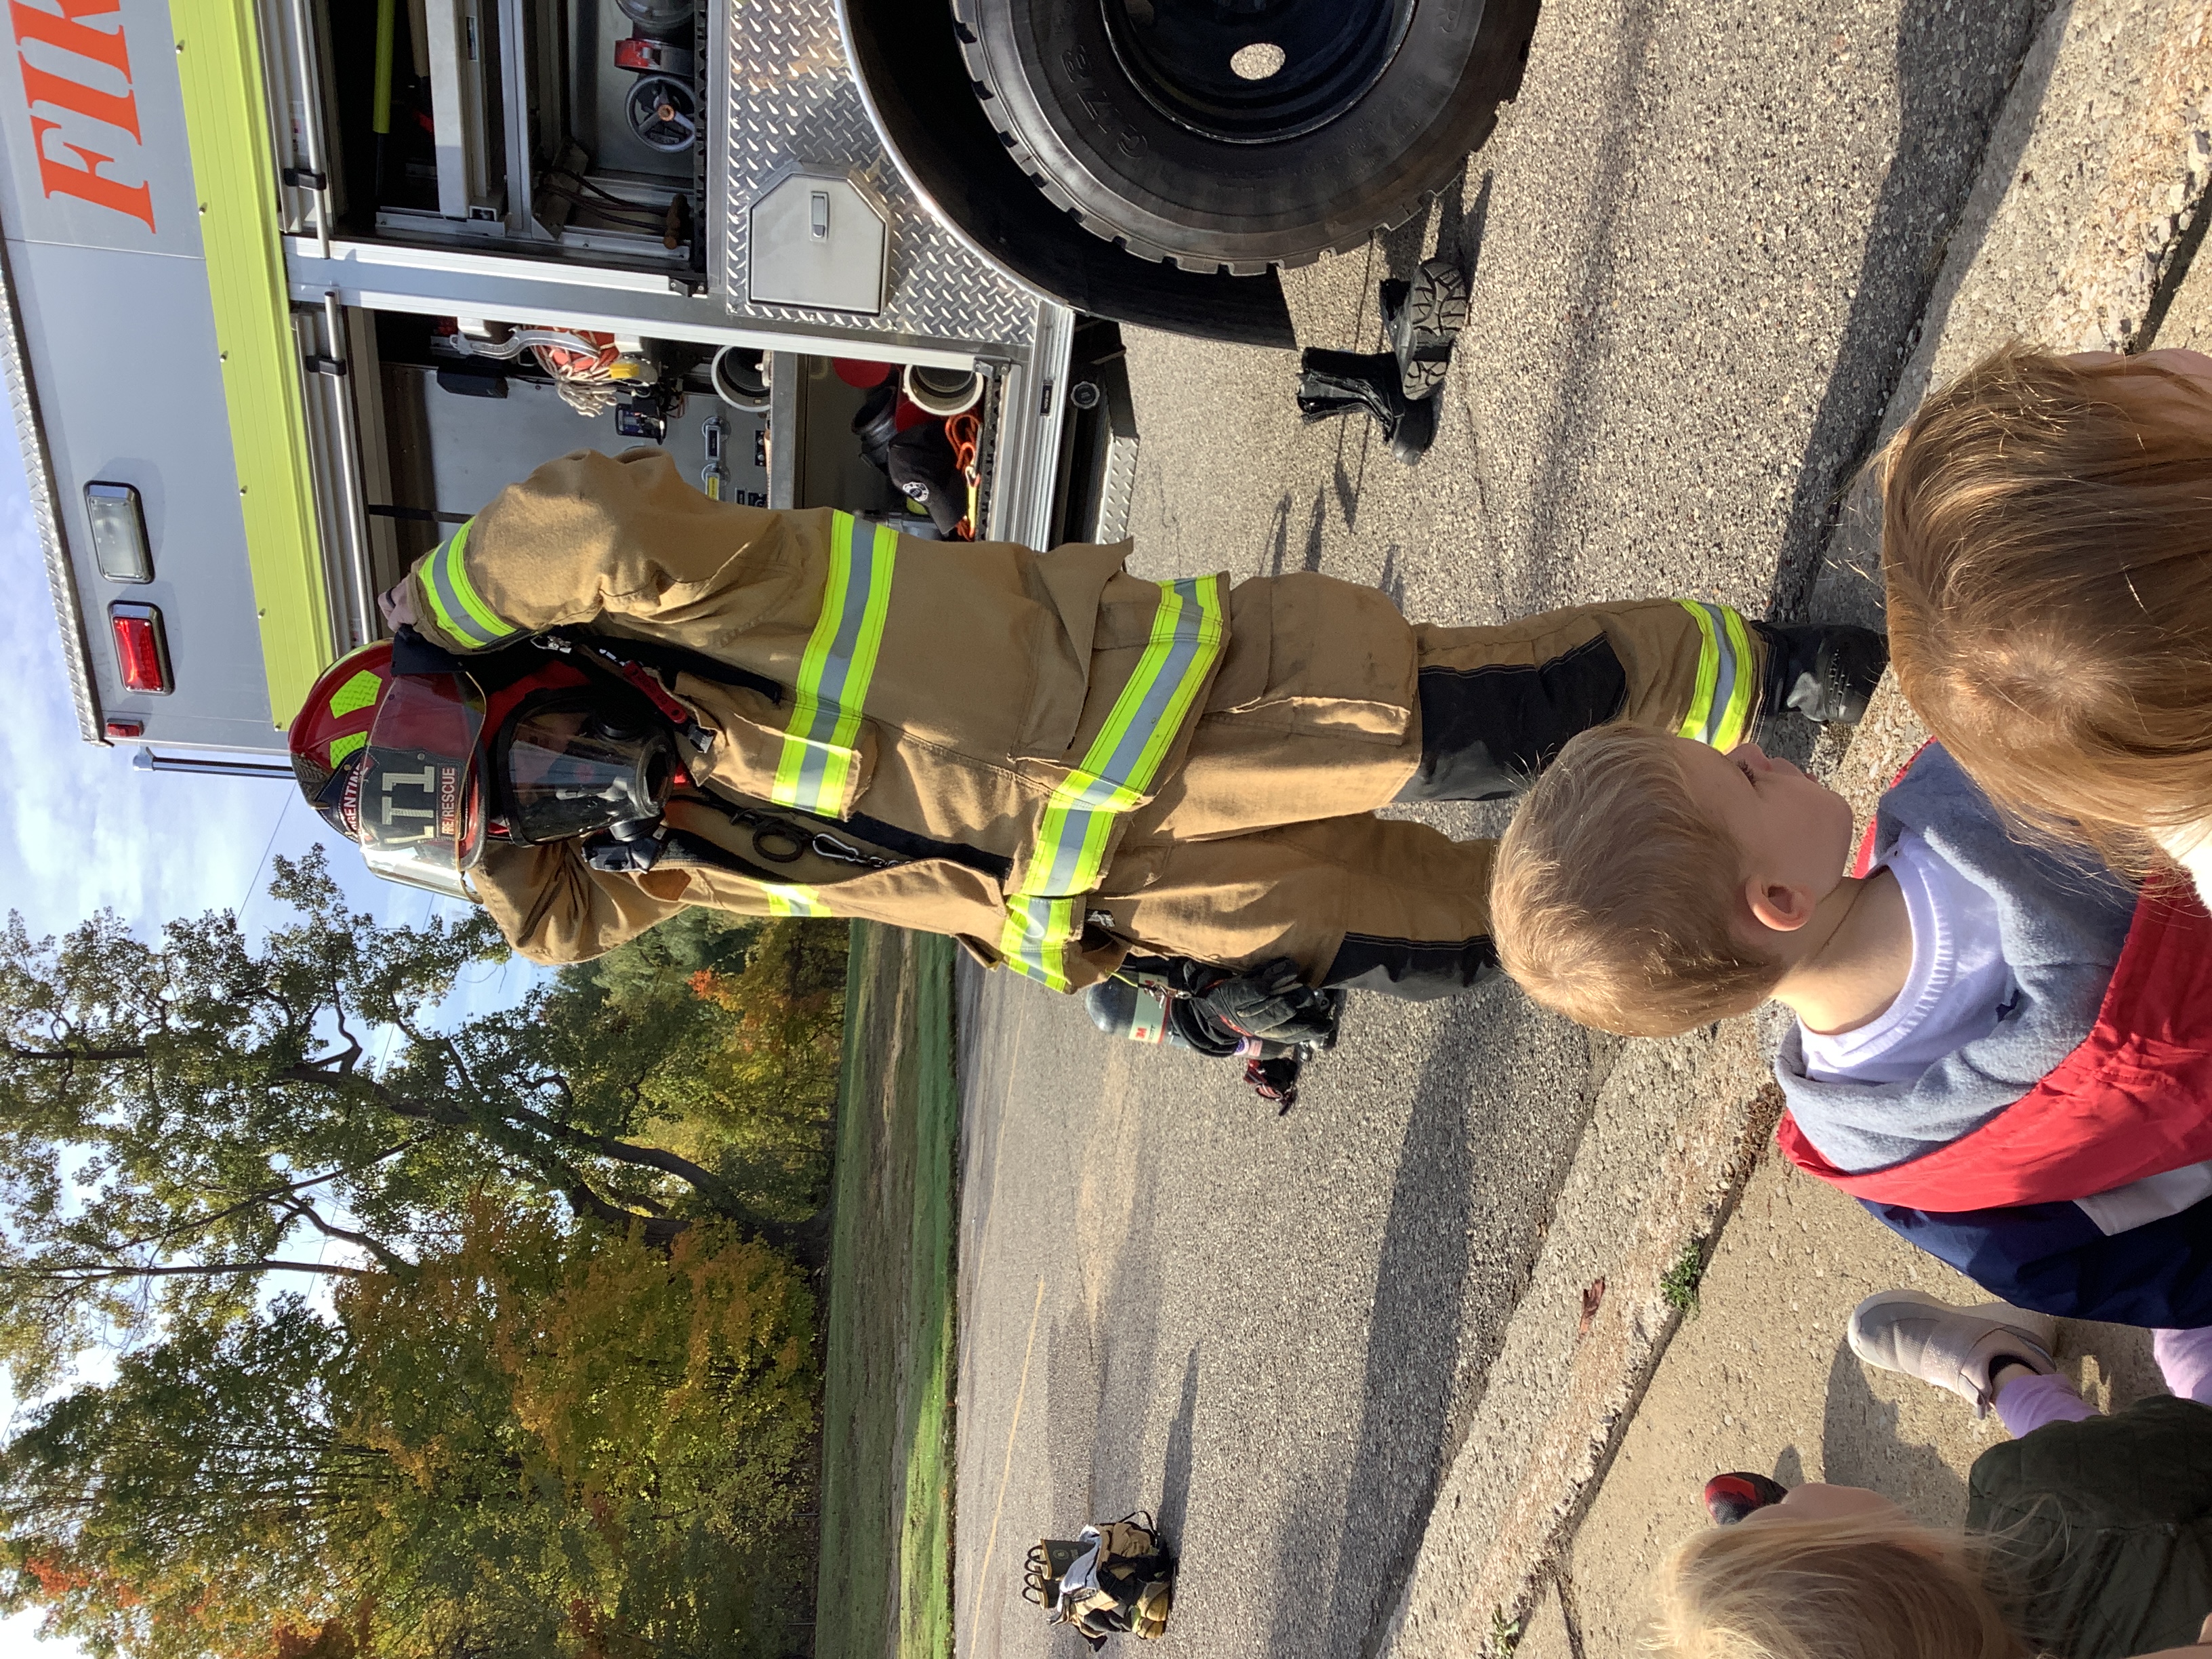 Argentine firefighters visit preschool. Children learn about fire safety and walk through a fire truck!